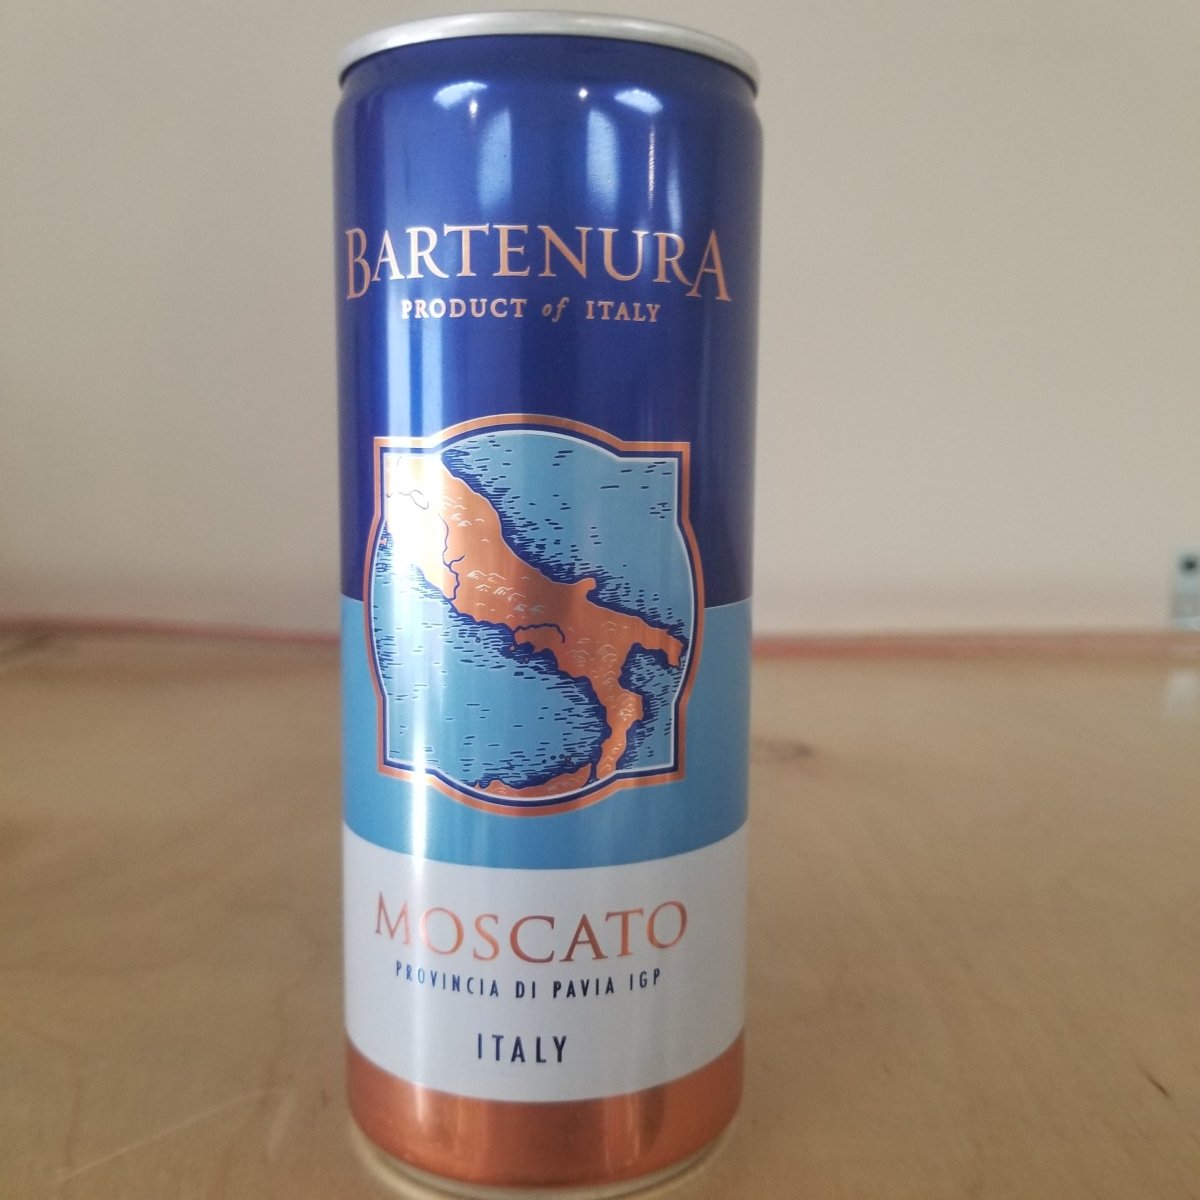 Bartenura Moscato Cans 250ml (Kosher for Passover/Mevushal) - Sip & Say